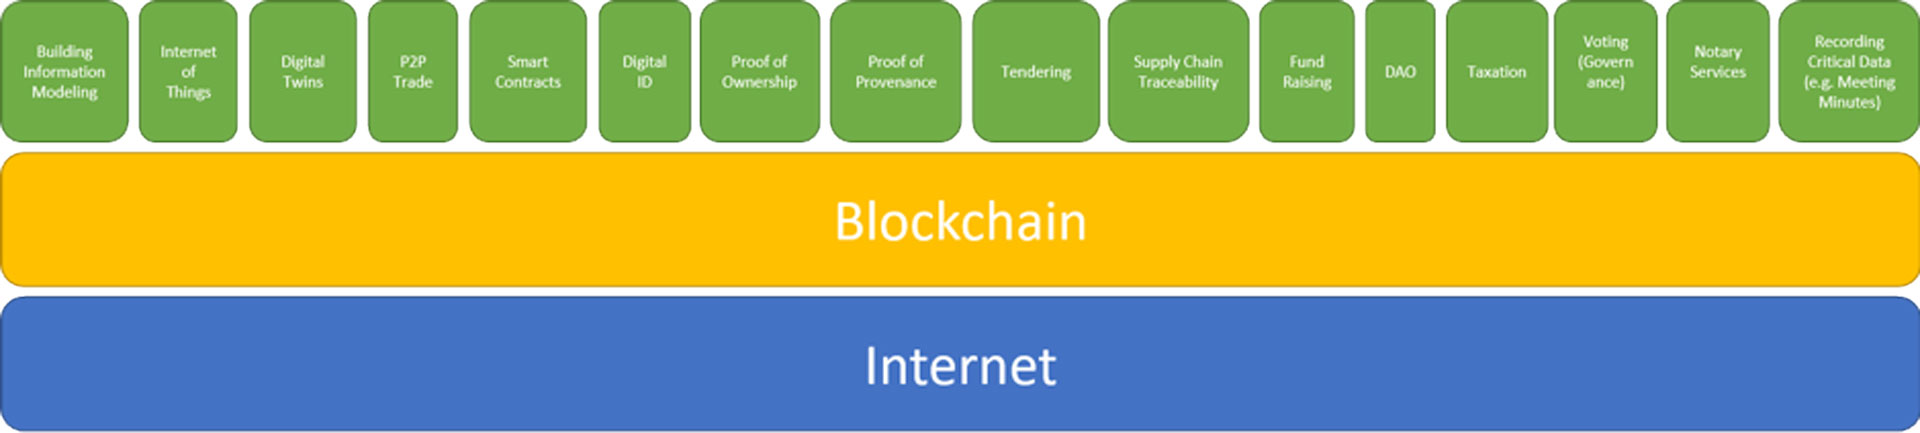 Blockchain potential for AEC industry